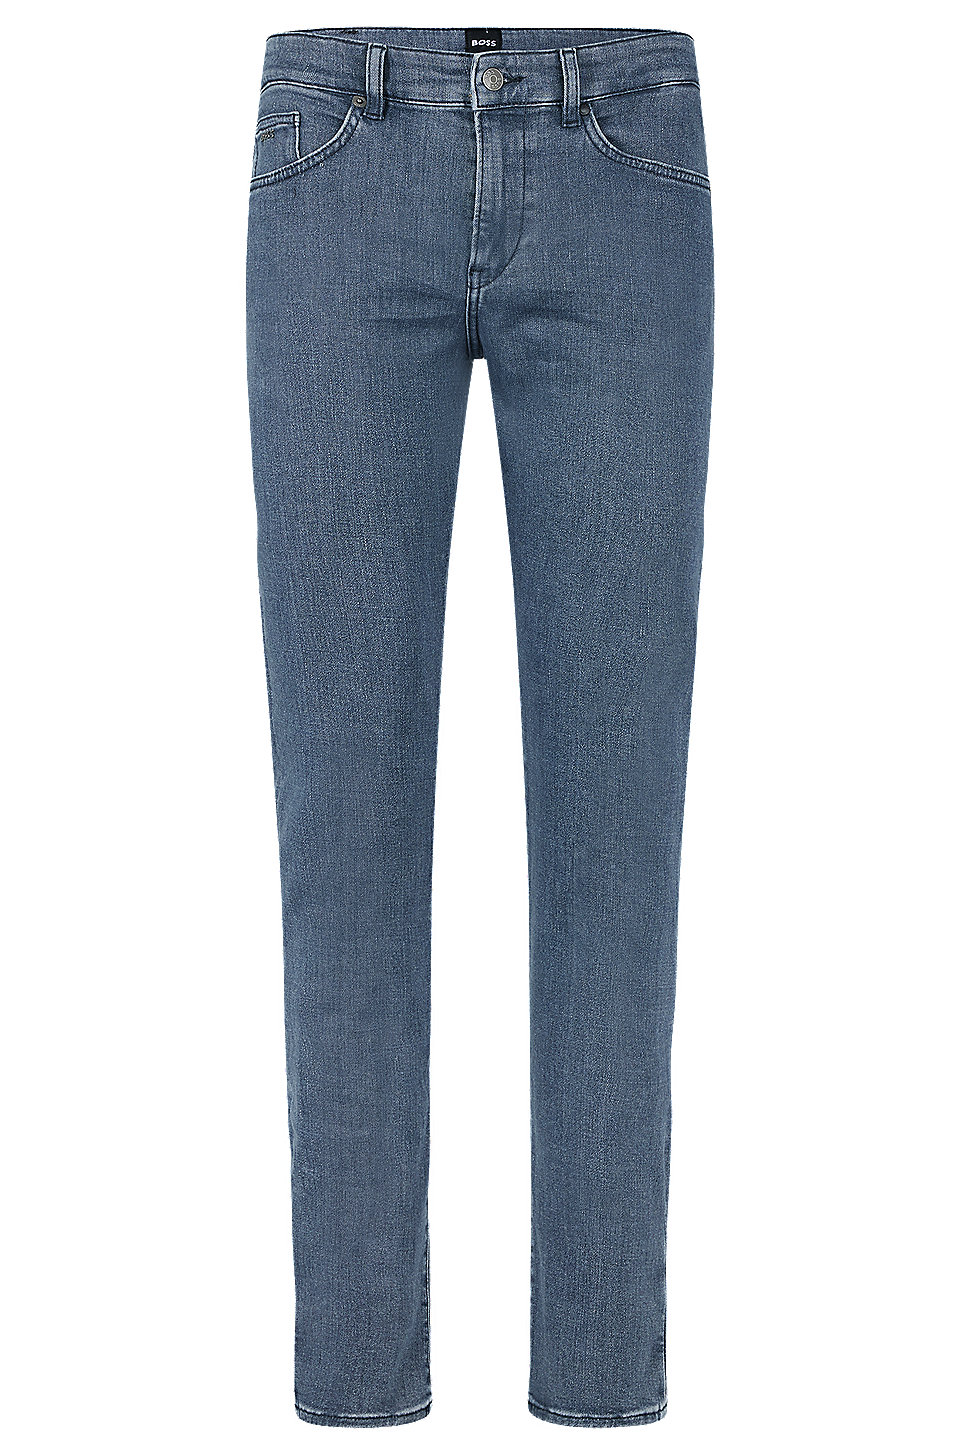 BOSS - Slim-fit jeans in gray Italian cashmere-touch denim